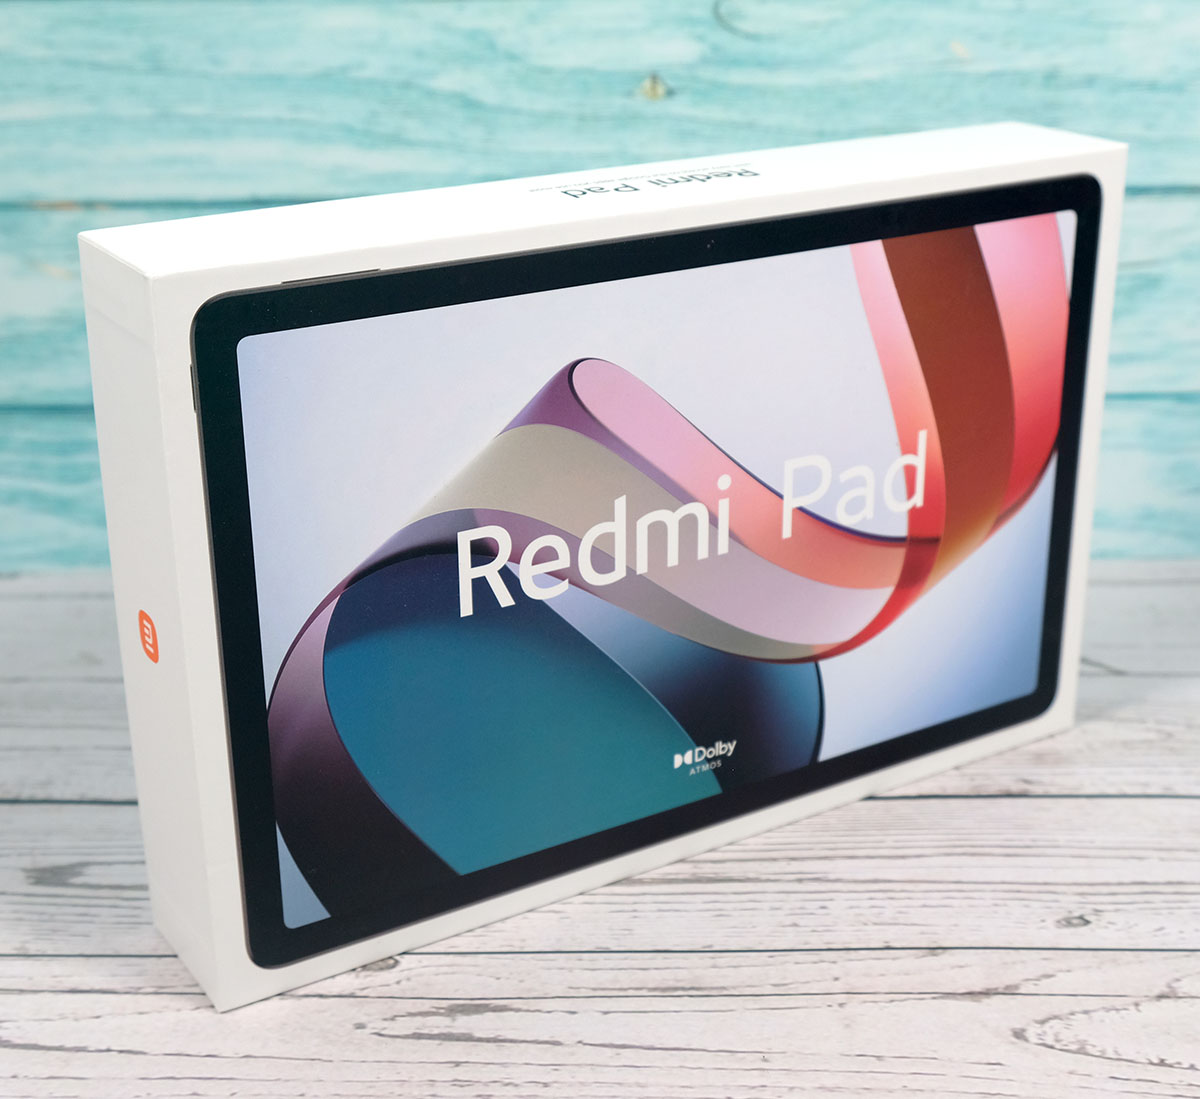 Xiaomi Redmi Pad first look: An Android tablet that gets the price